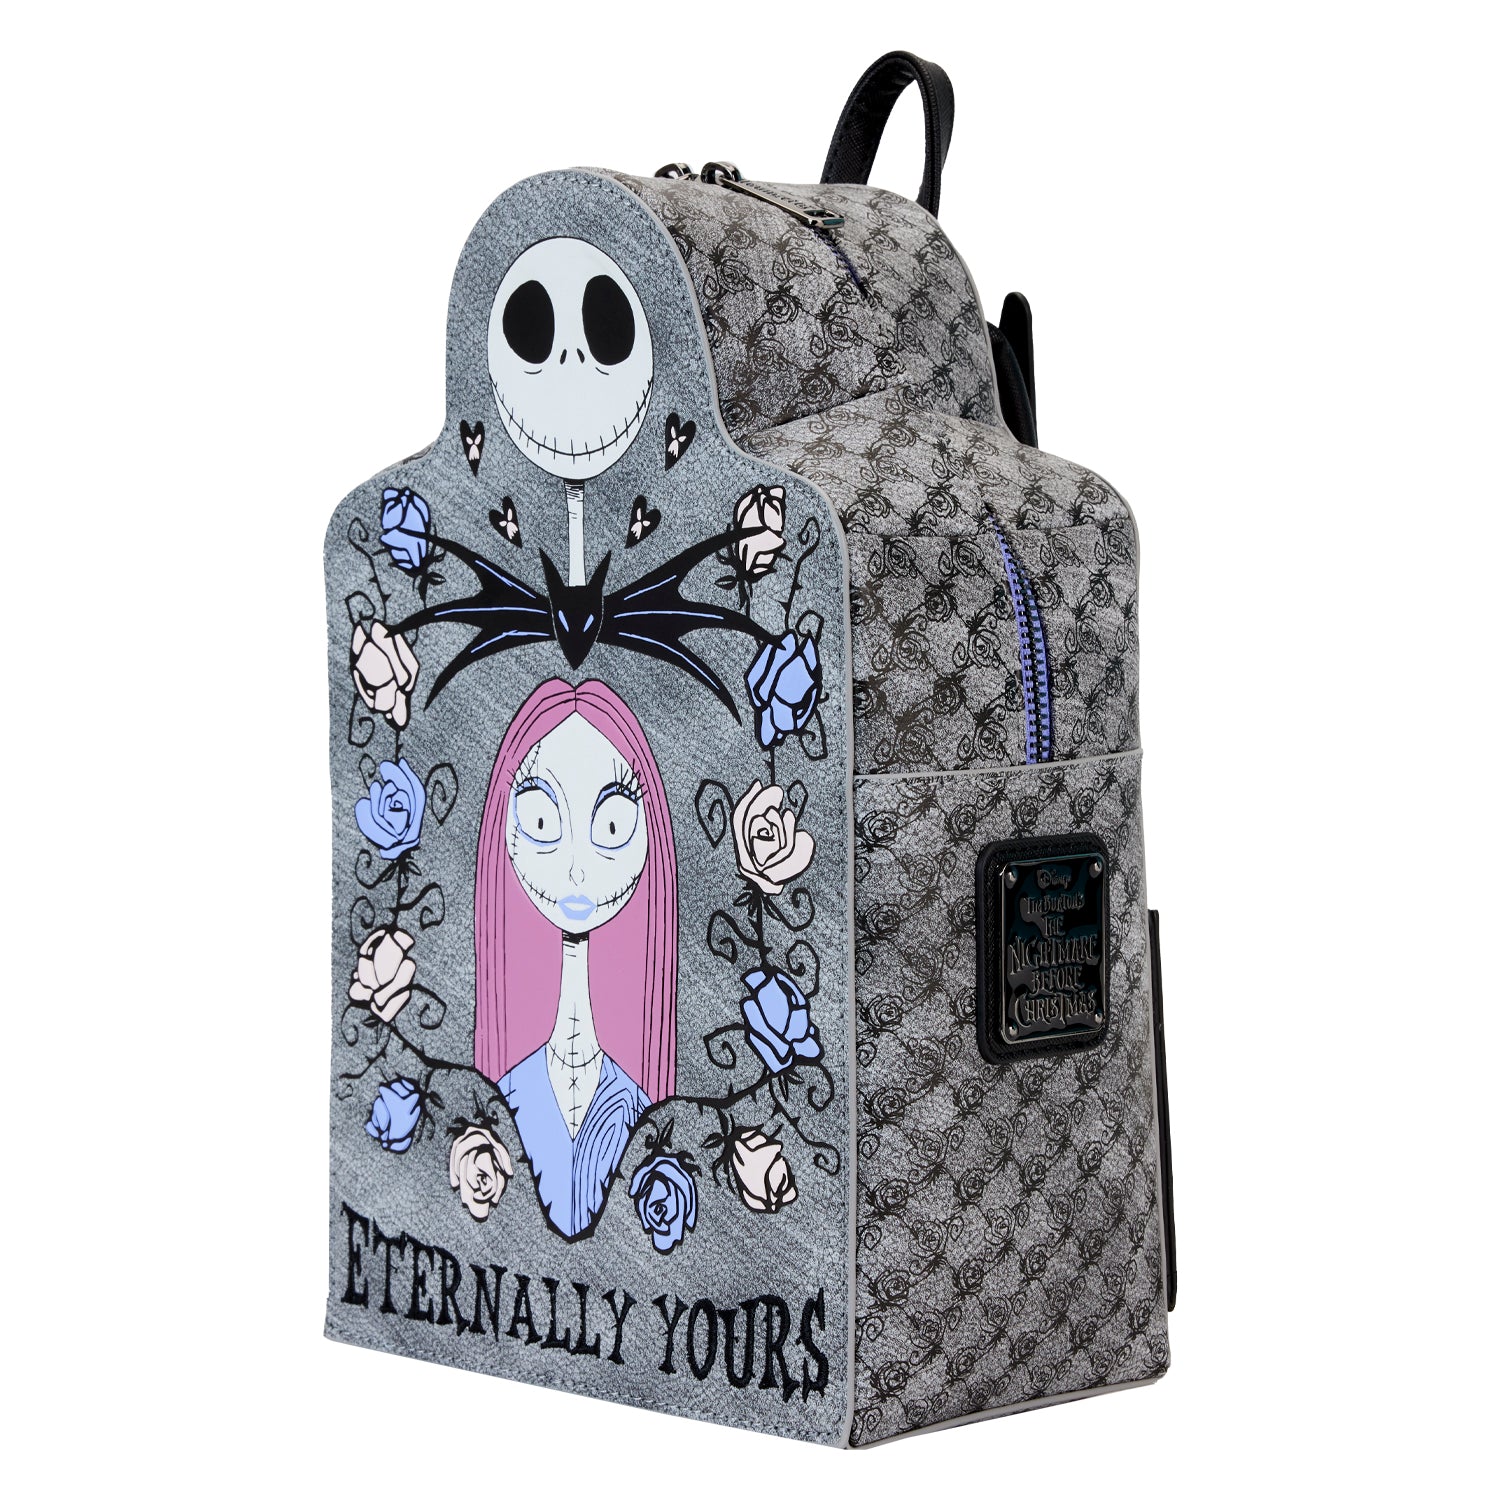 Loungefly Disney NBC Jack And Sally Eternally Yours Mini Backpack